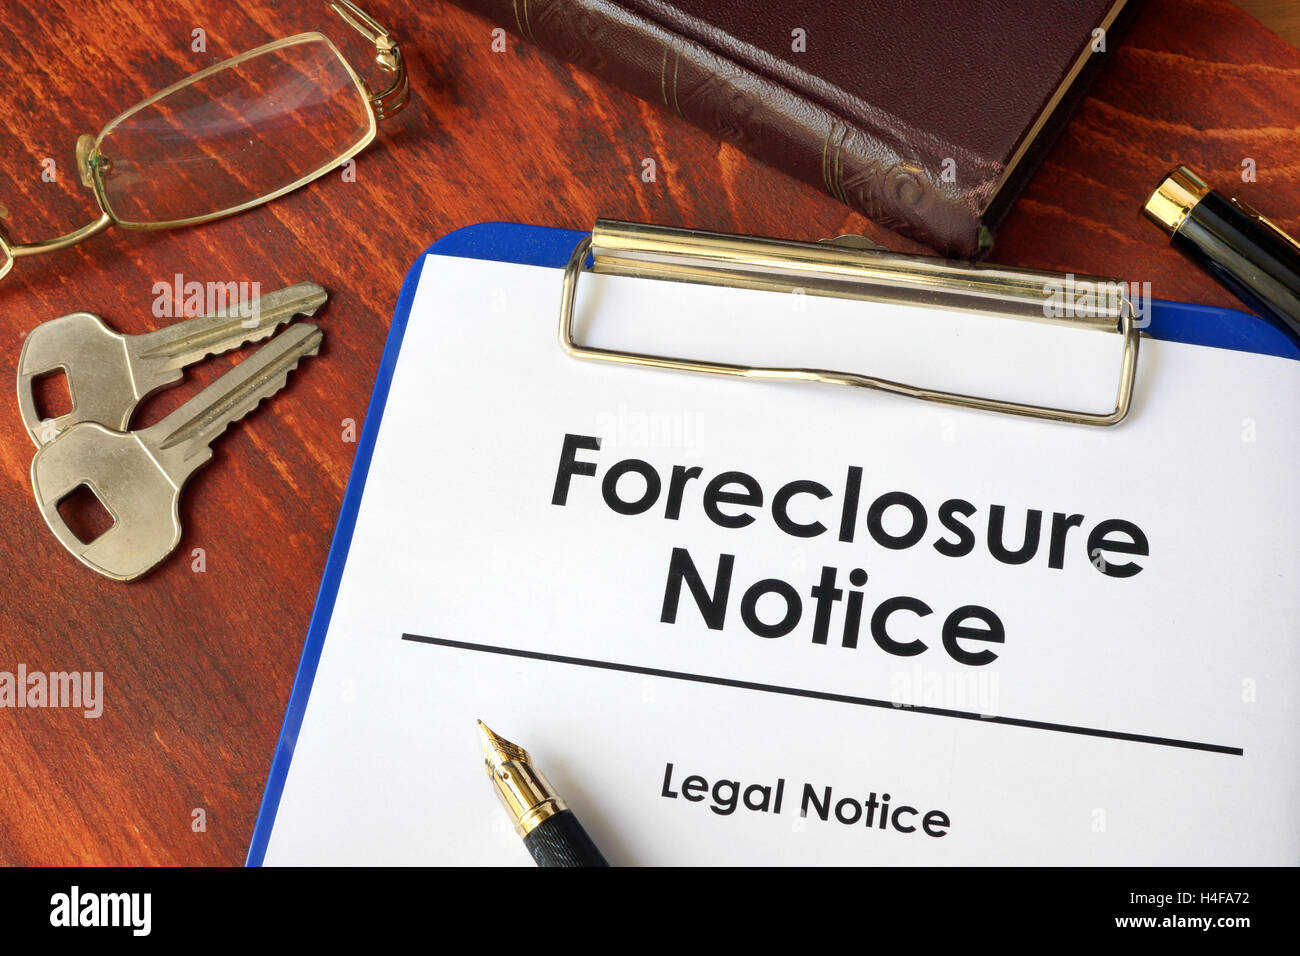 Paper with words Foreclosure Notice on a wooden surface. Stock Photo